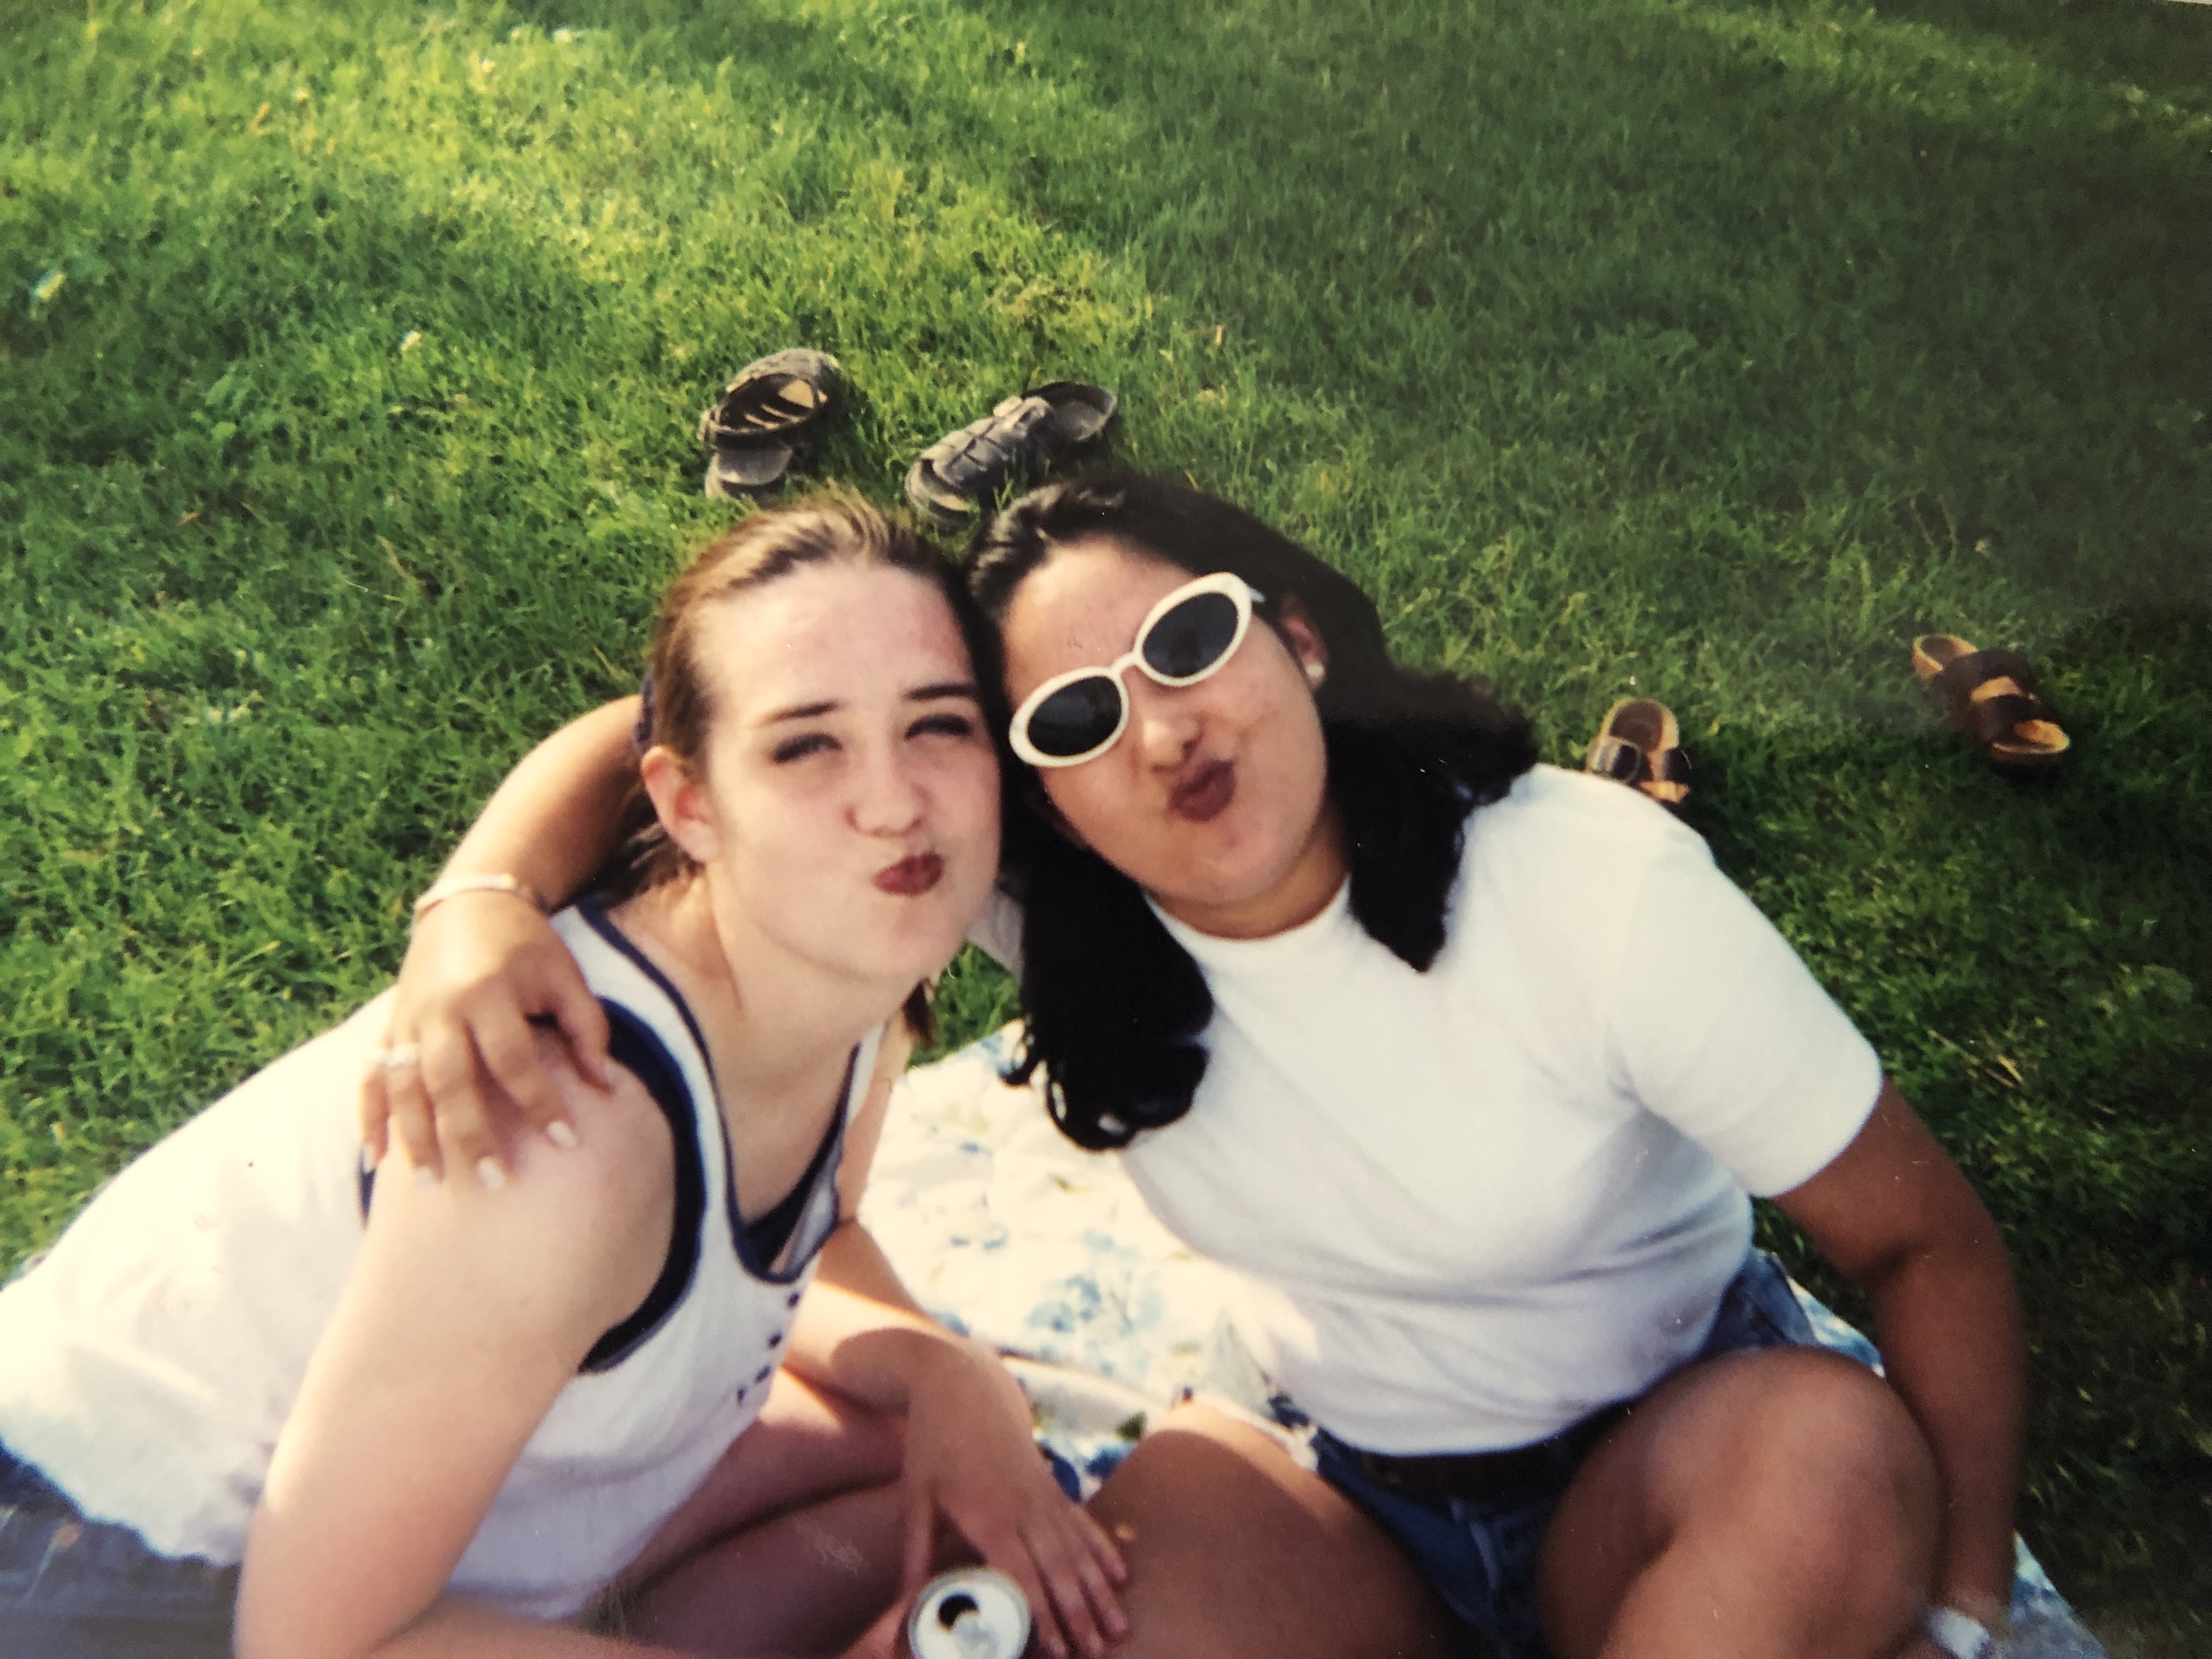 A teenaged Karissa and host sister making kissy faces, arm in arm, sitting on a picnic blanket together